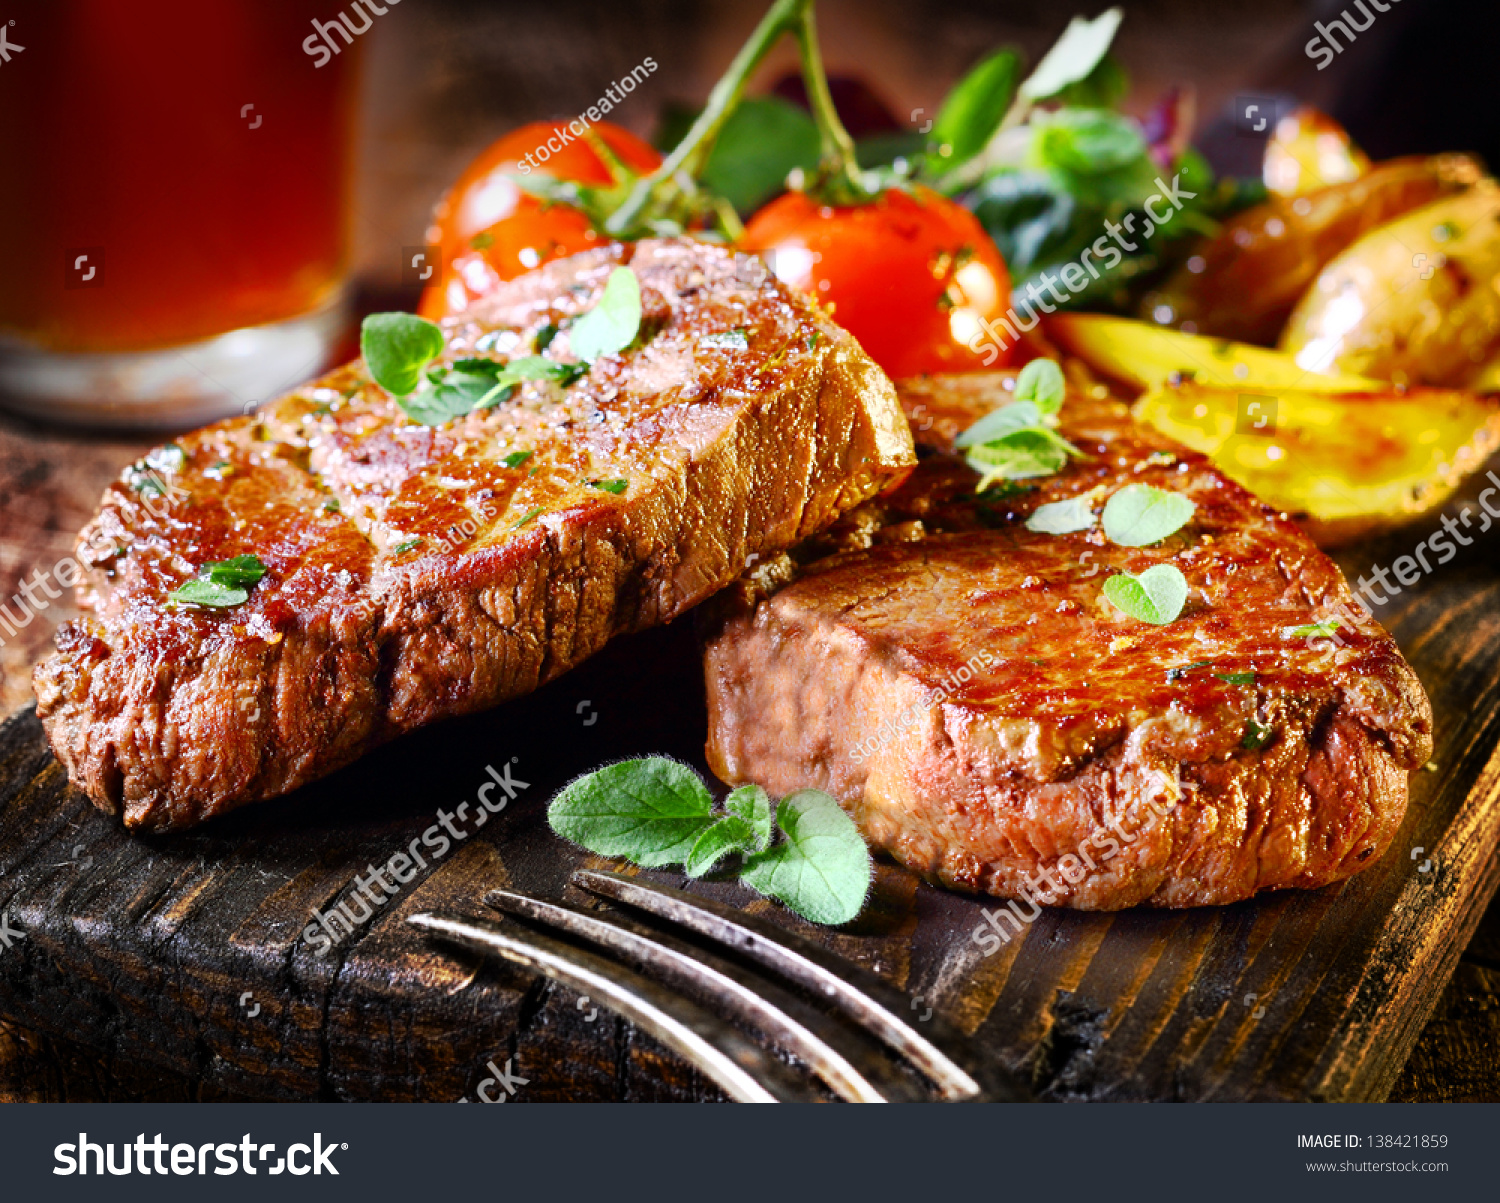 Succulent thick juicy portions of grilled fillet steak served with tomatoes and roast vegetables on an old wooden board #138421859